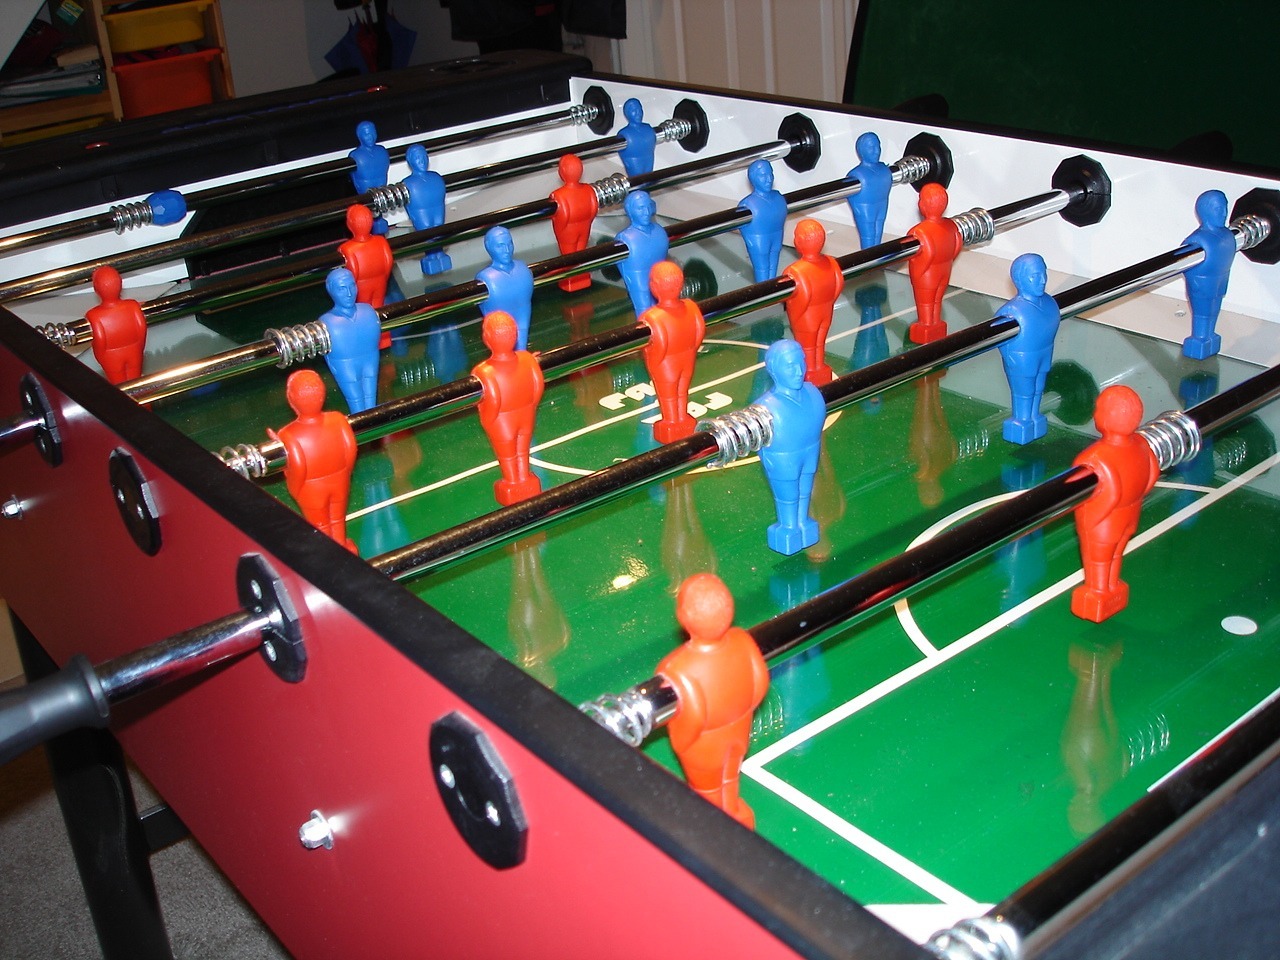 The Ultimate Guide to Finding the Best Foosball Table